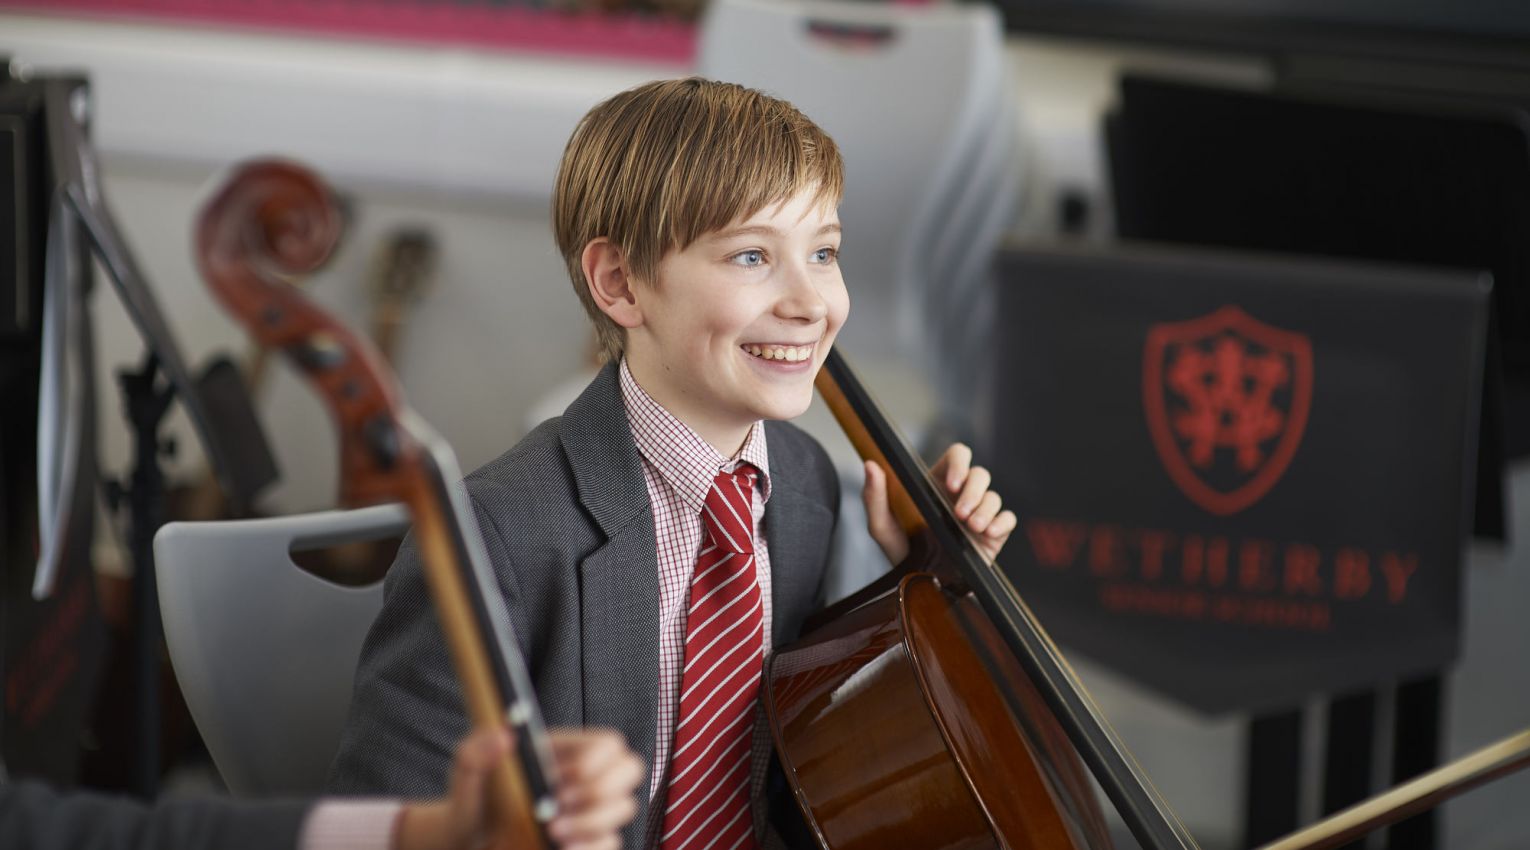 Music student at Wetherby Senior